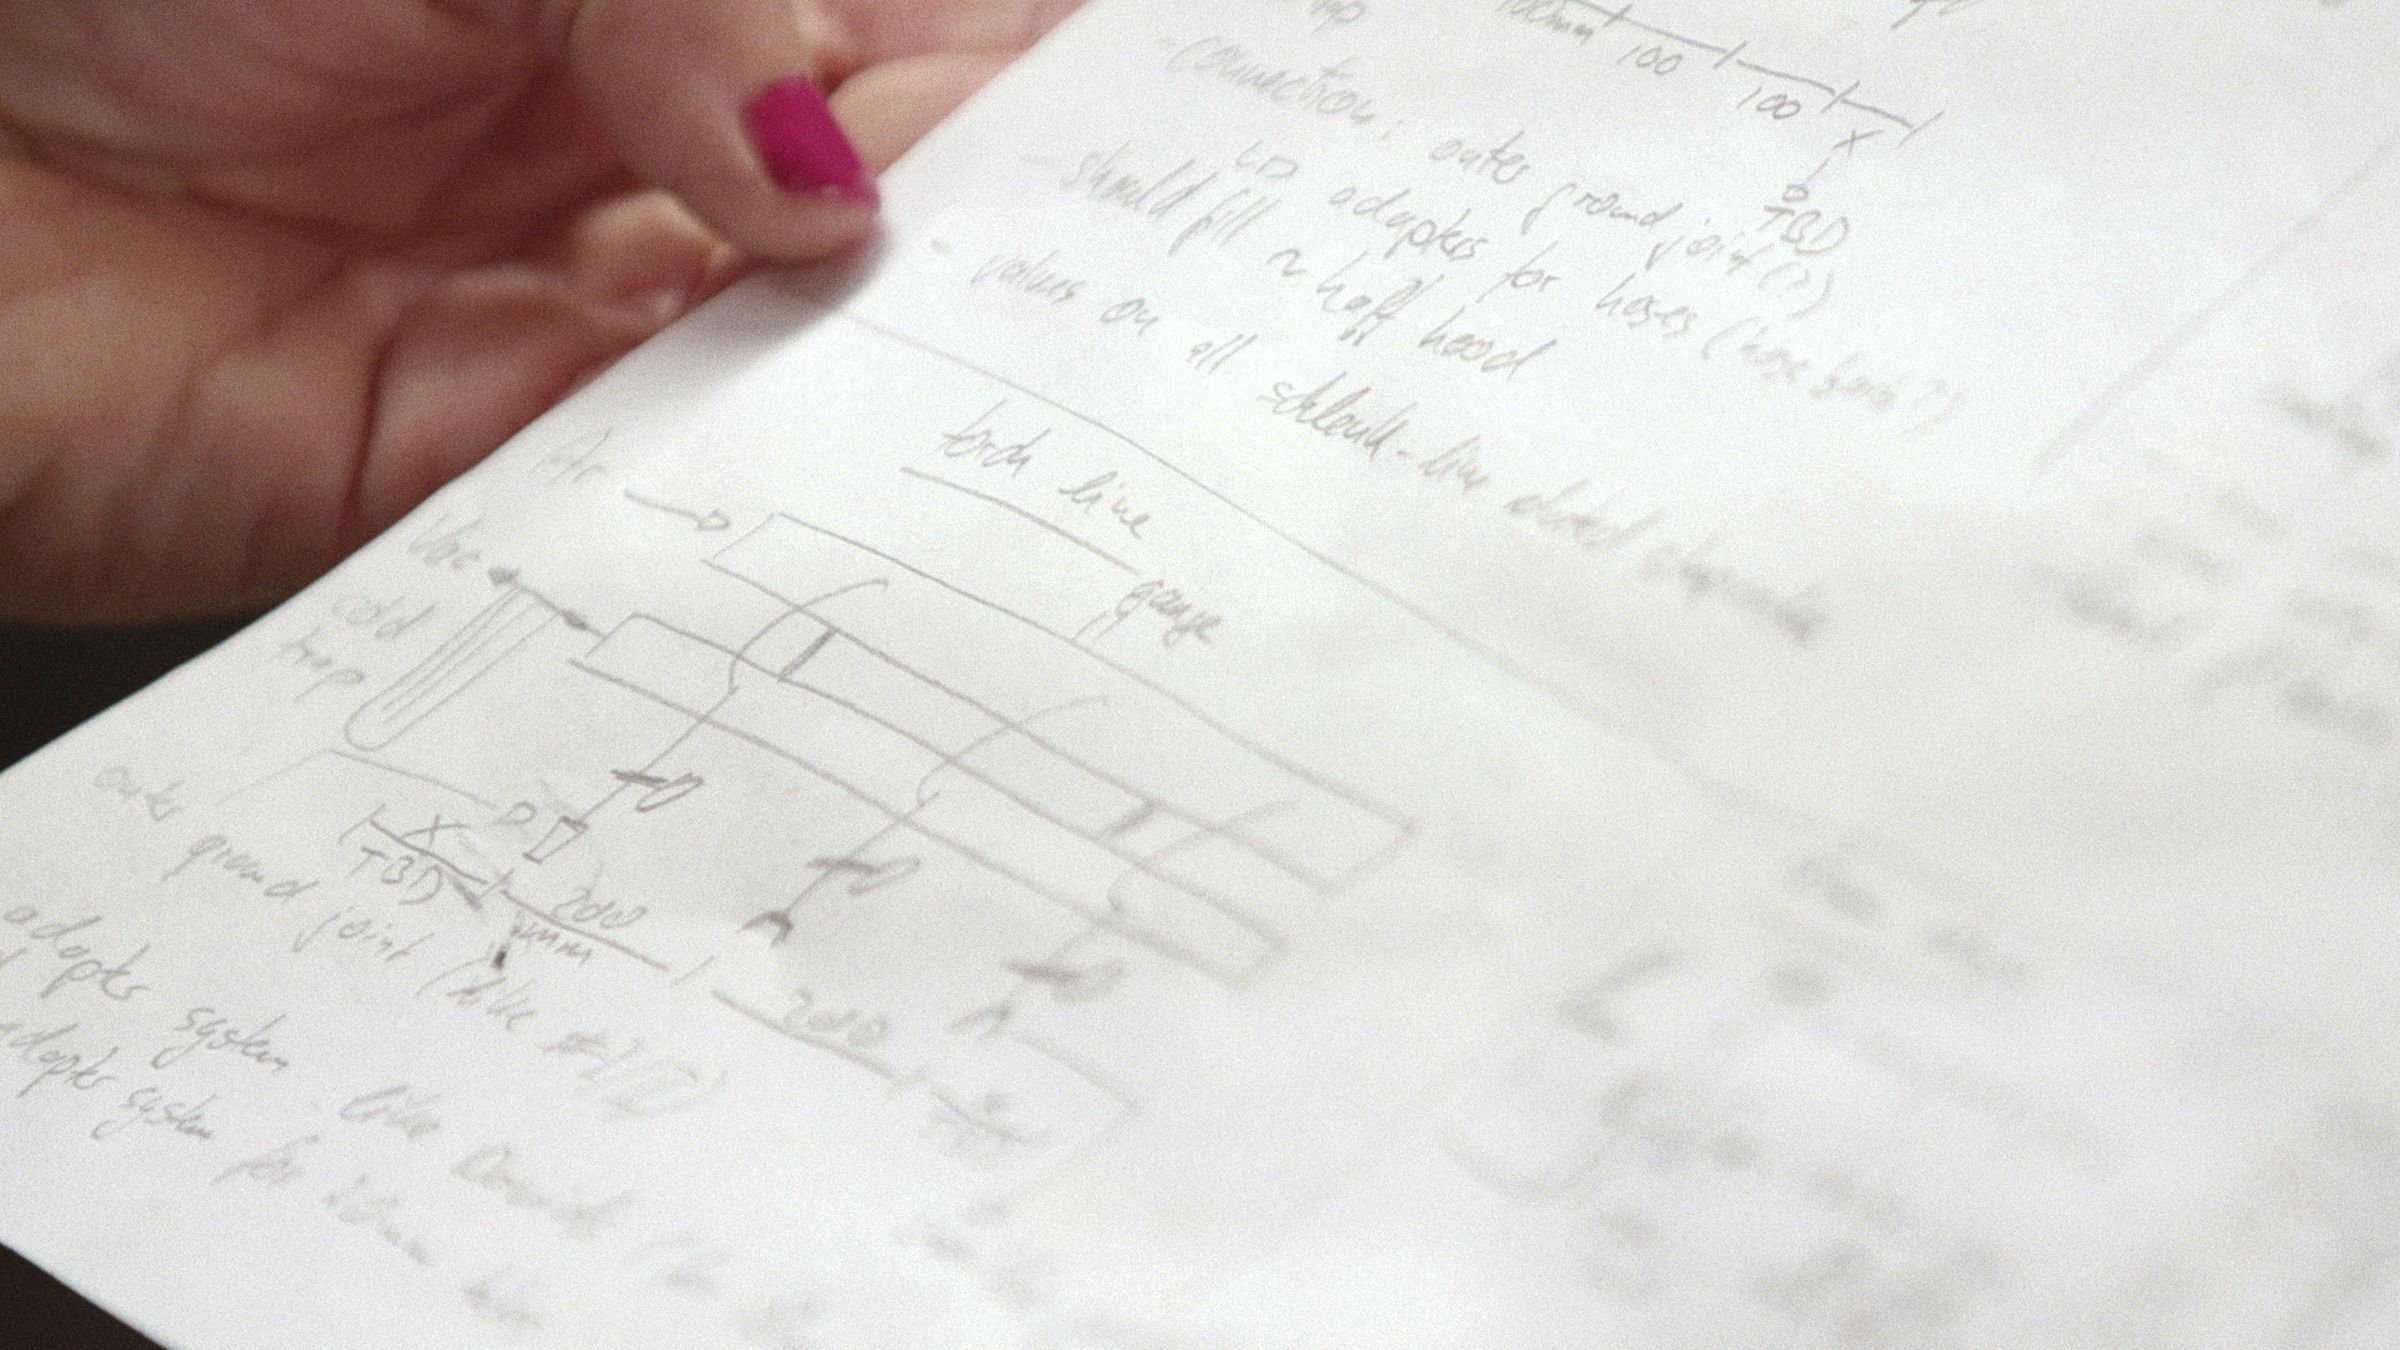 Roeger looks over a hand-drawn plan for a scientific instrument.